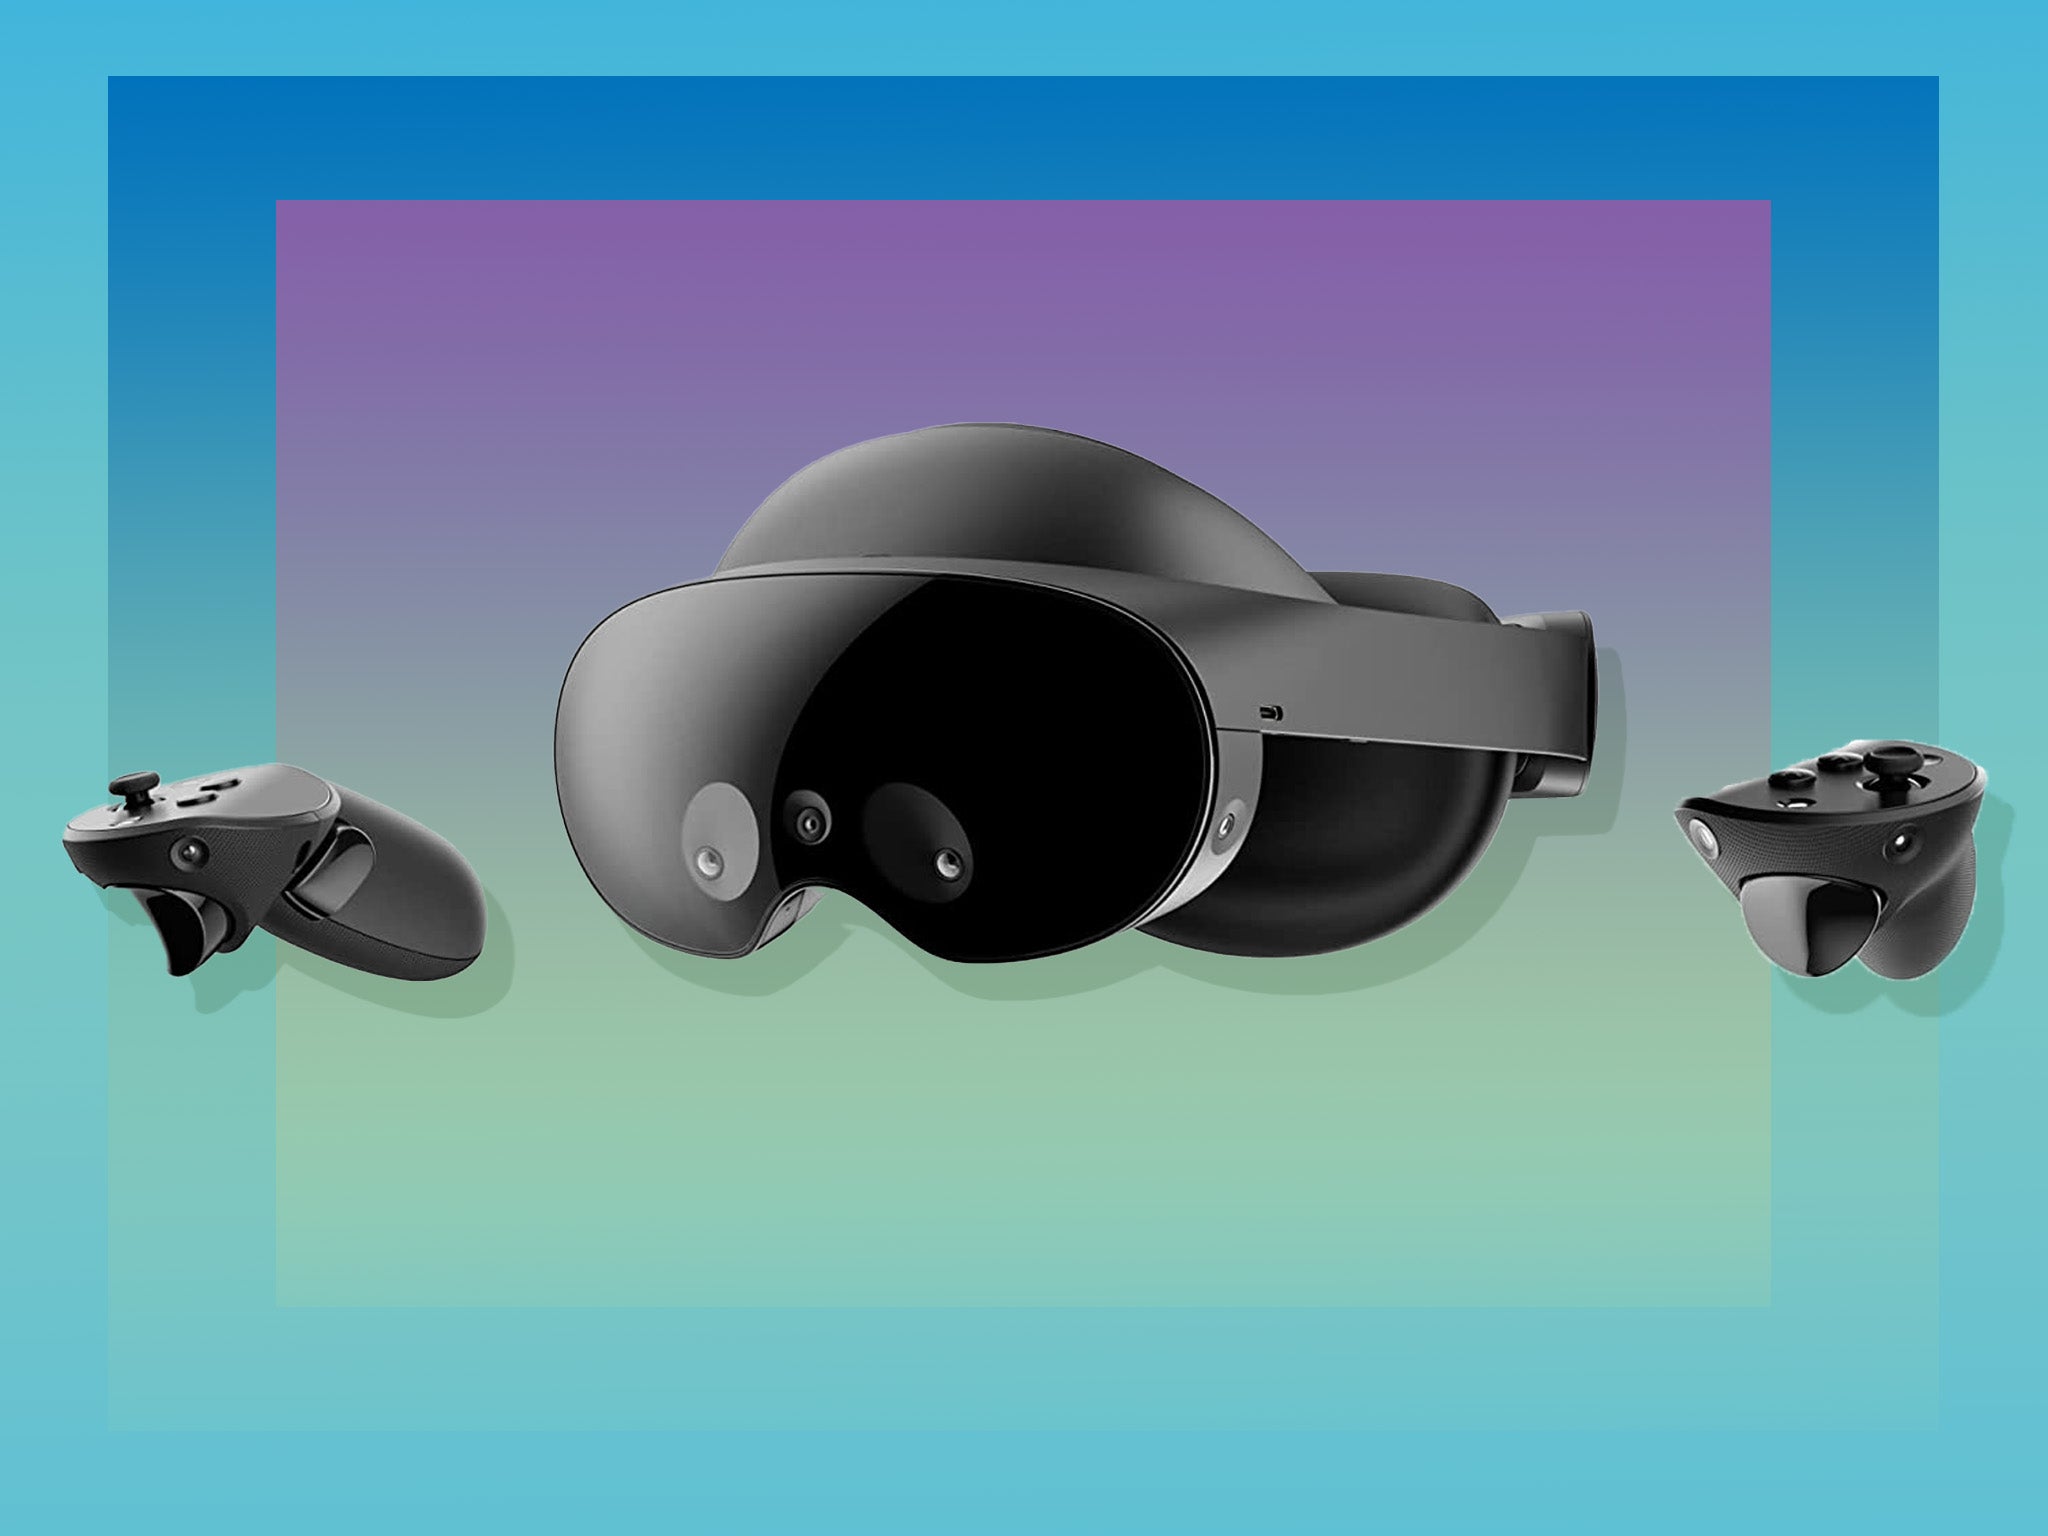 There are 10 mixed-reality sensors on the device